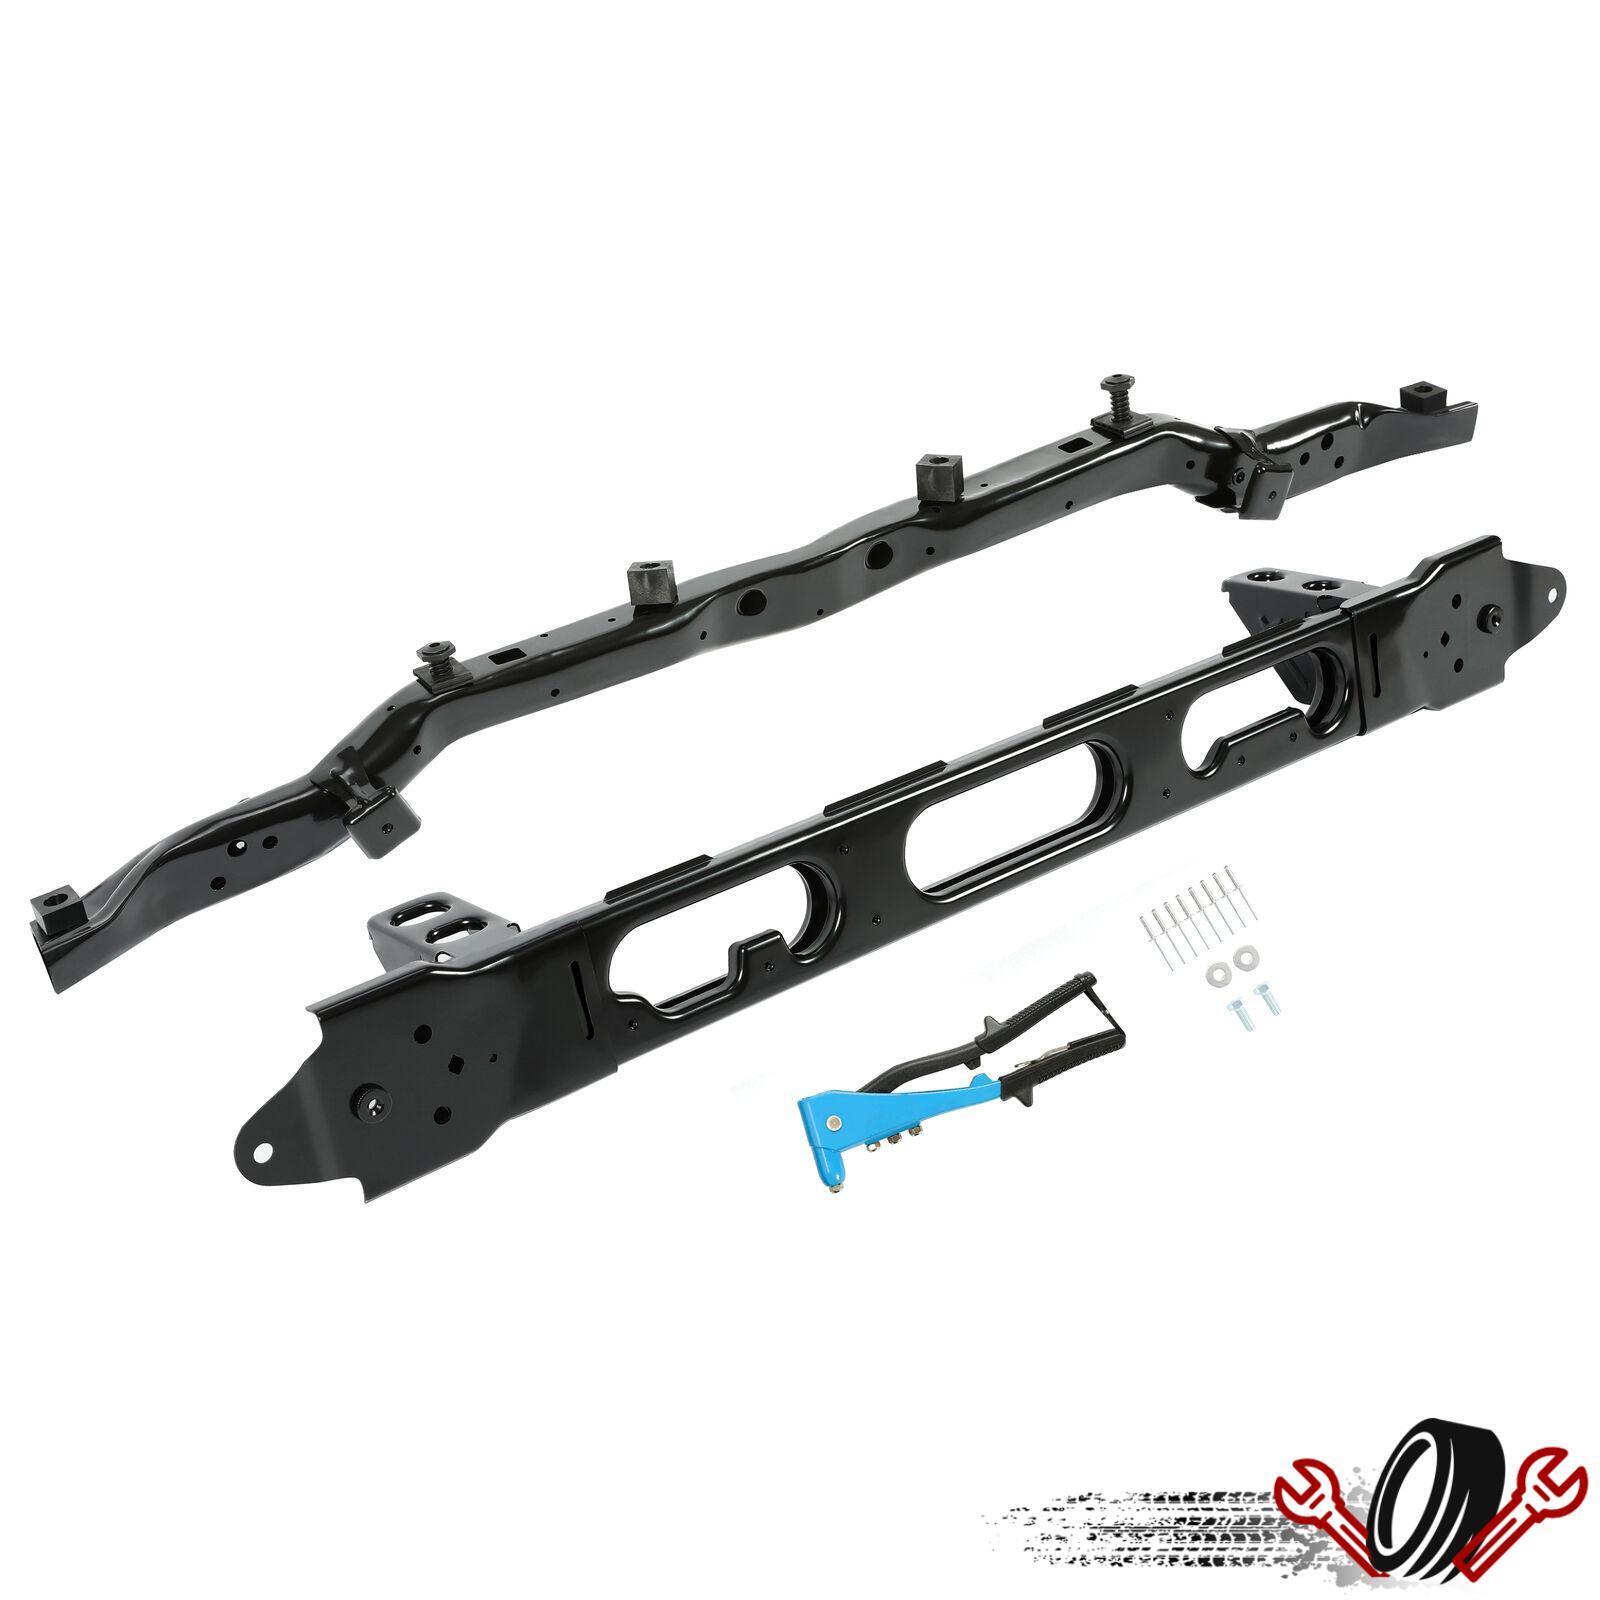 Steel Radiator Support Core Assembly Electrophoresis For Ram 1500 Pickup 2014-18